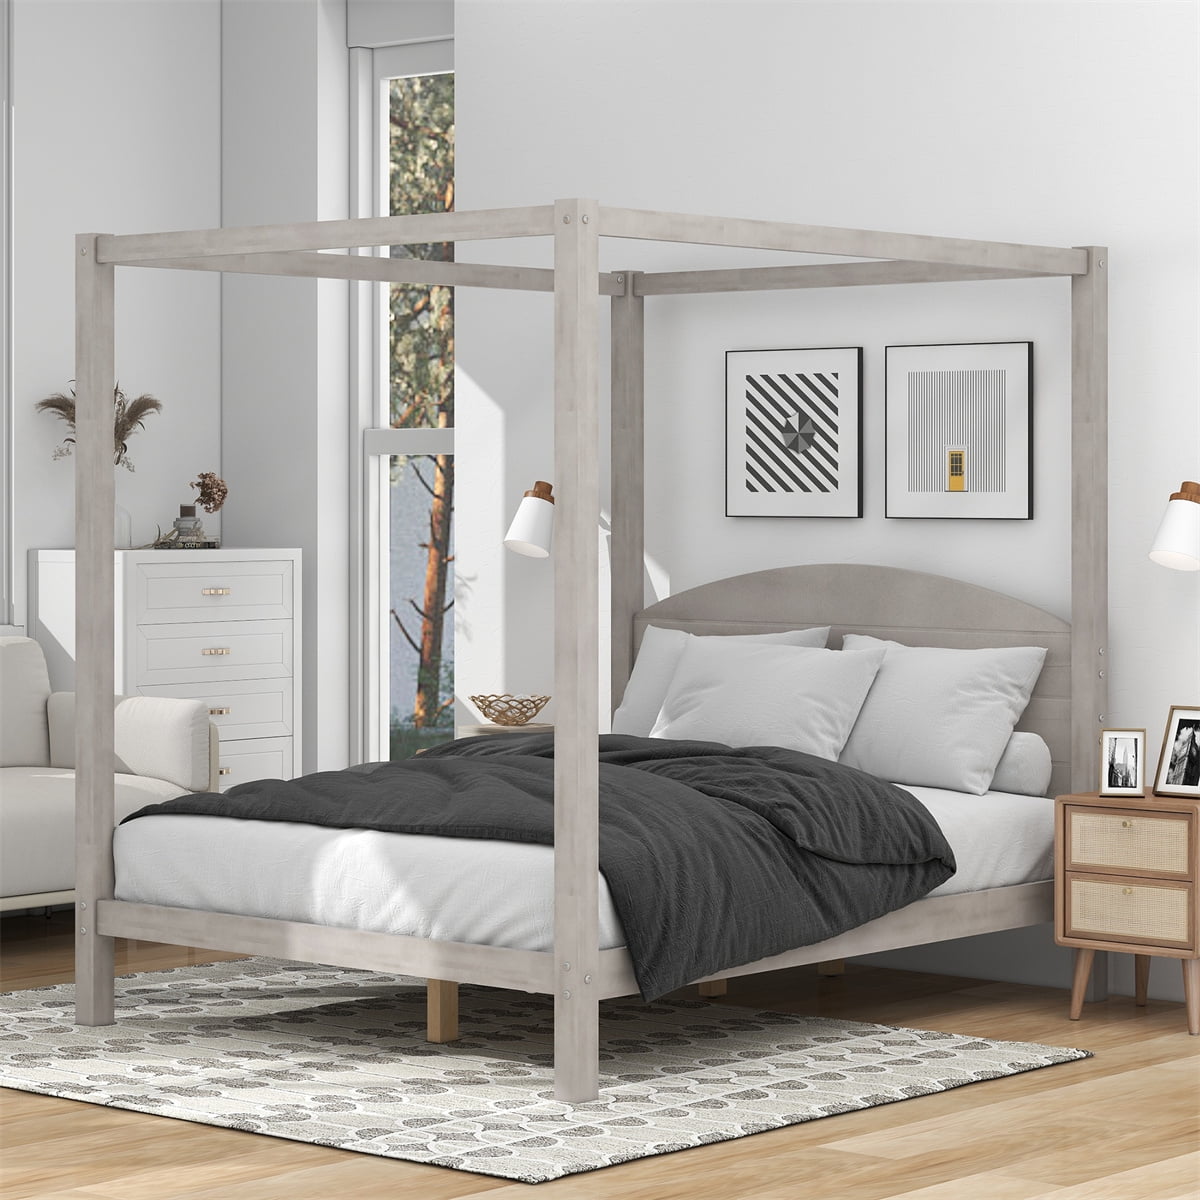 Oeganda Ampère Vijf Queen Size Canopy Bed with Headboard,Modern 4-Post Canopy Platform Bed Frame  with Wood Support Legs and Underbed Space,Solid Wood Canopy Bed Frame for  Kids Teens Adults,No Box Spring Needed,Grey - Walmart.com